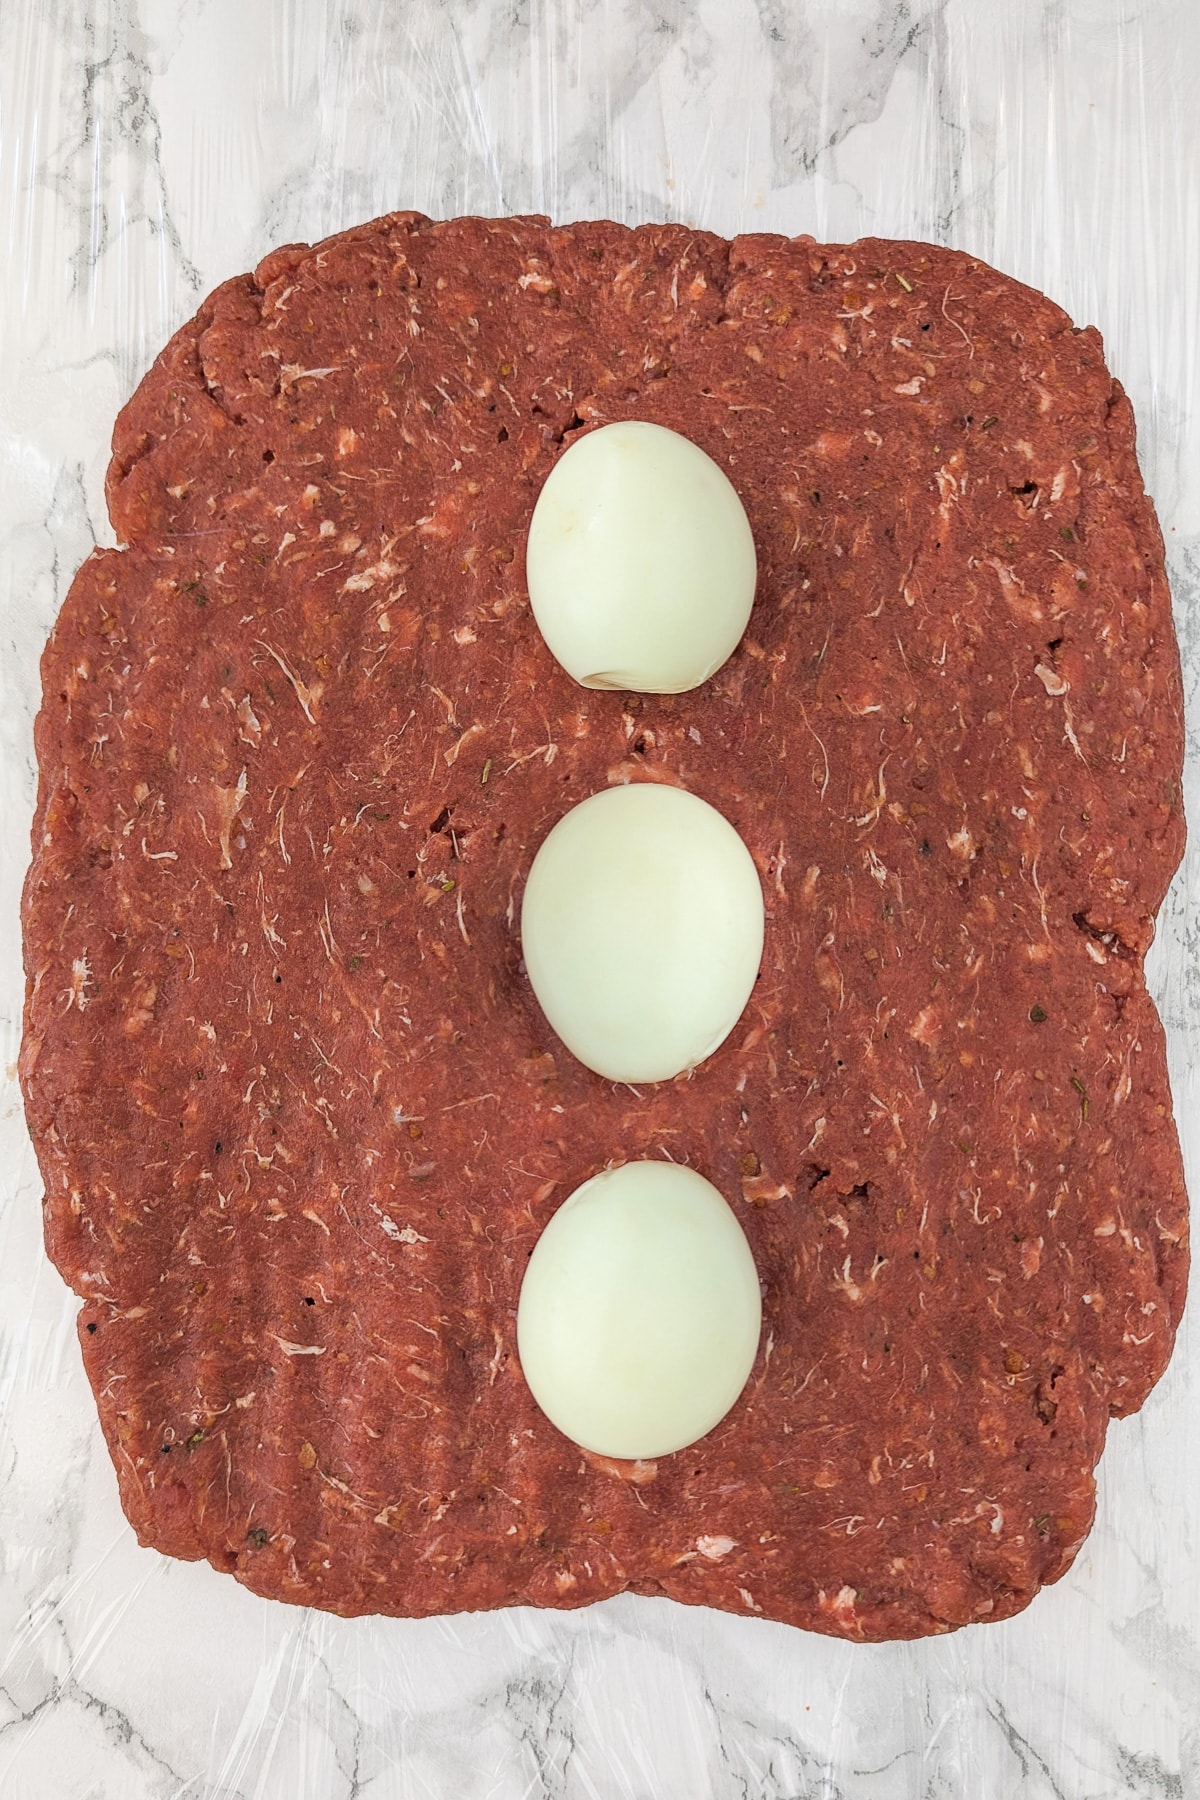 Top view of a layer of ground beef and 3 boiled eggs on it.